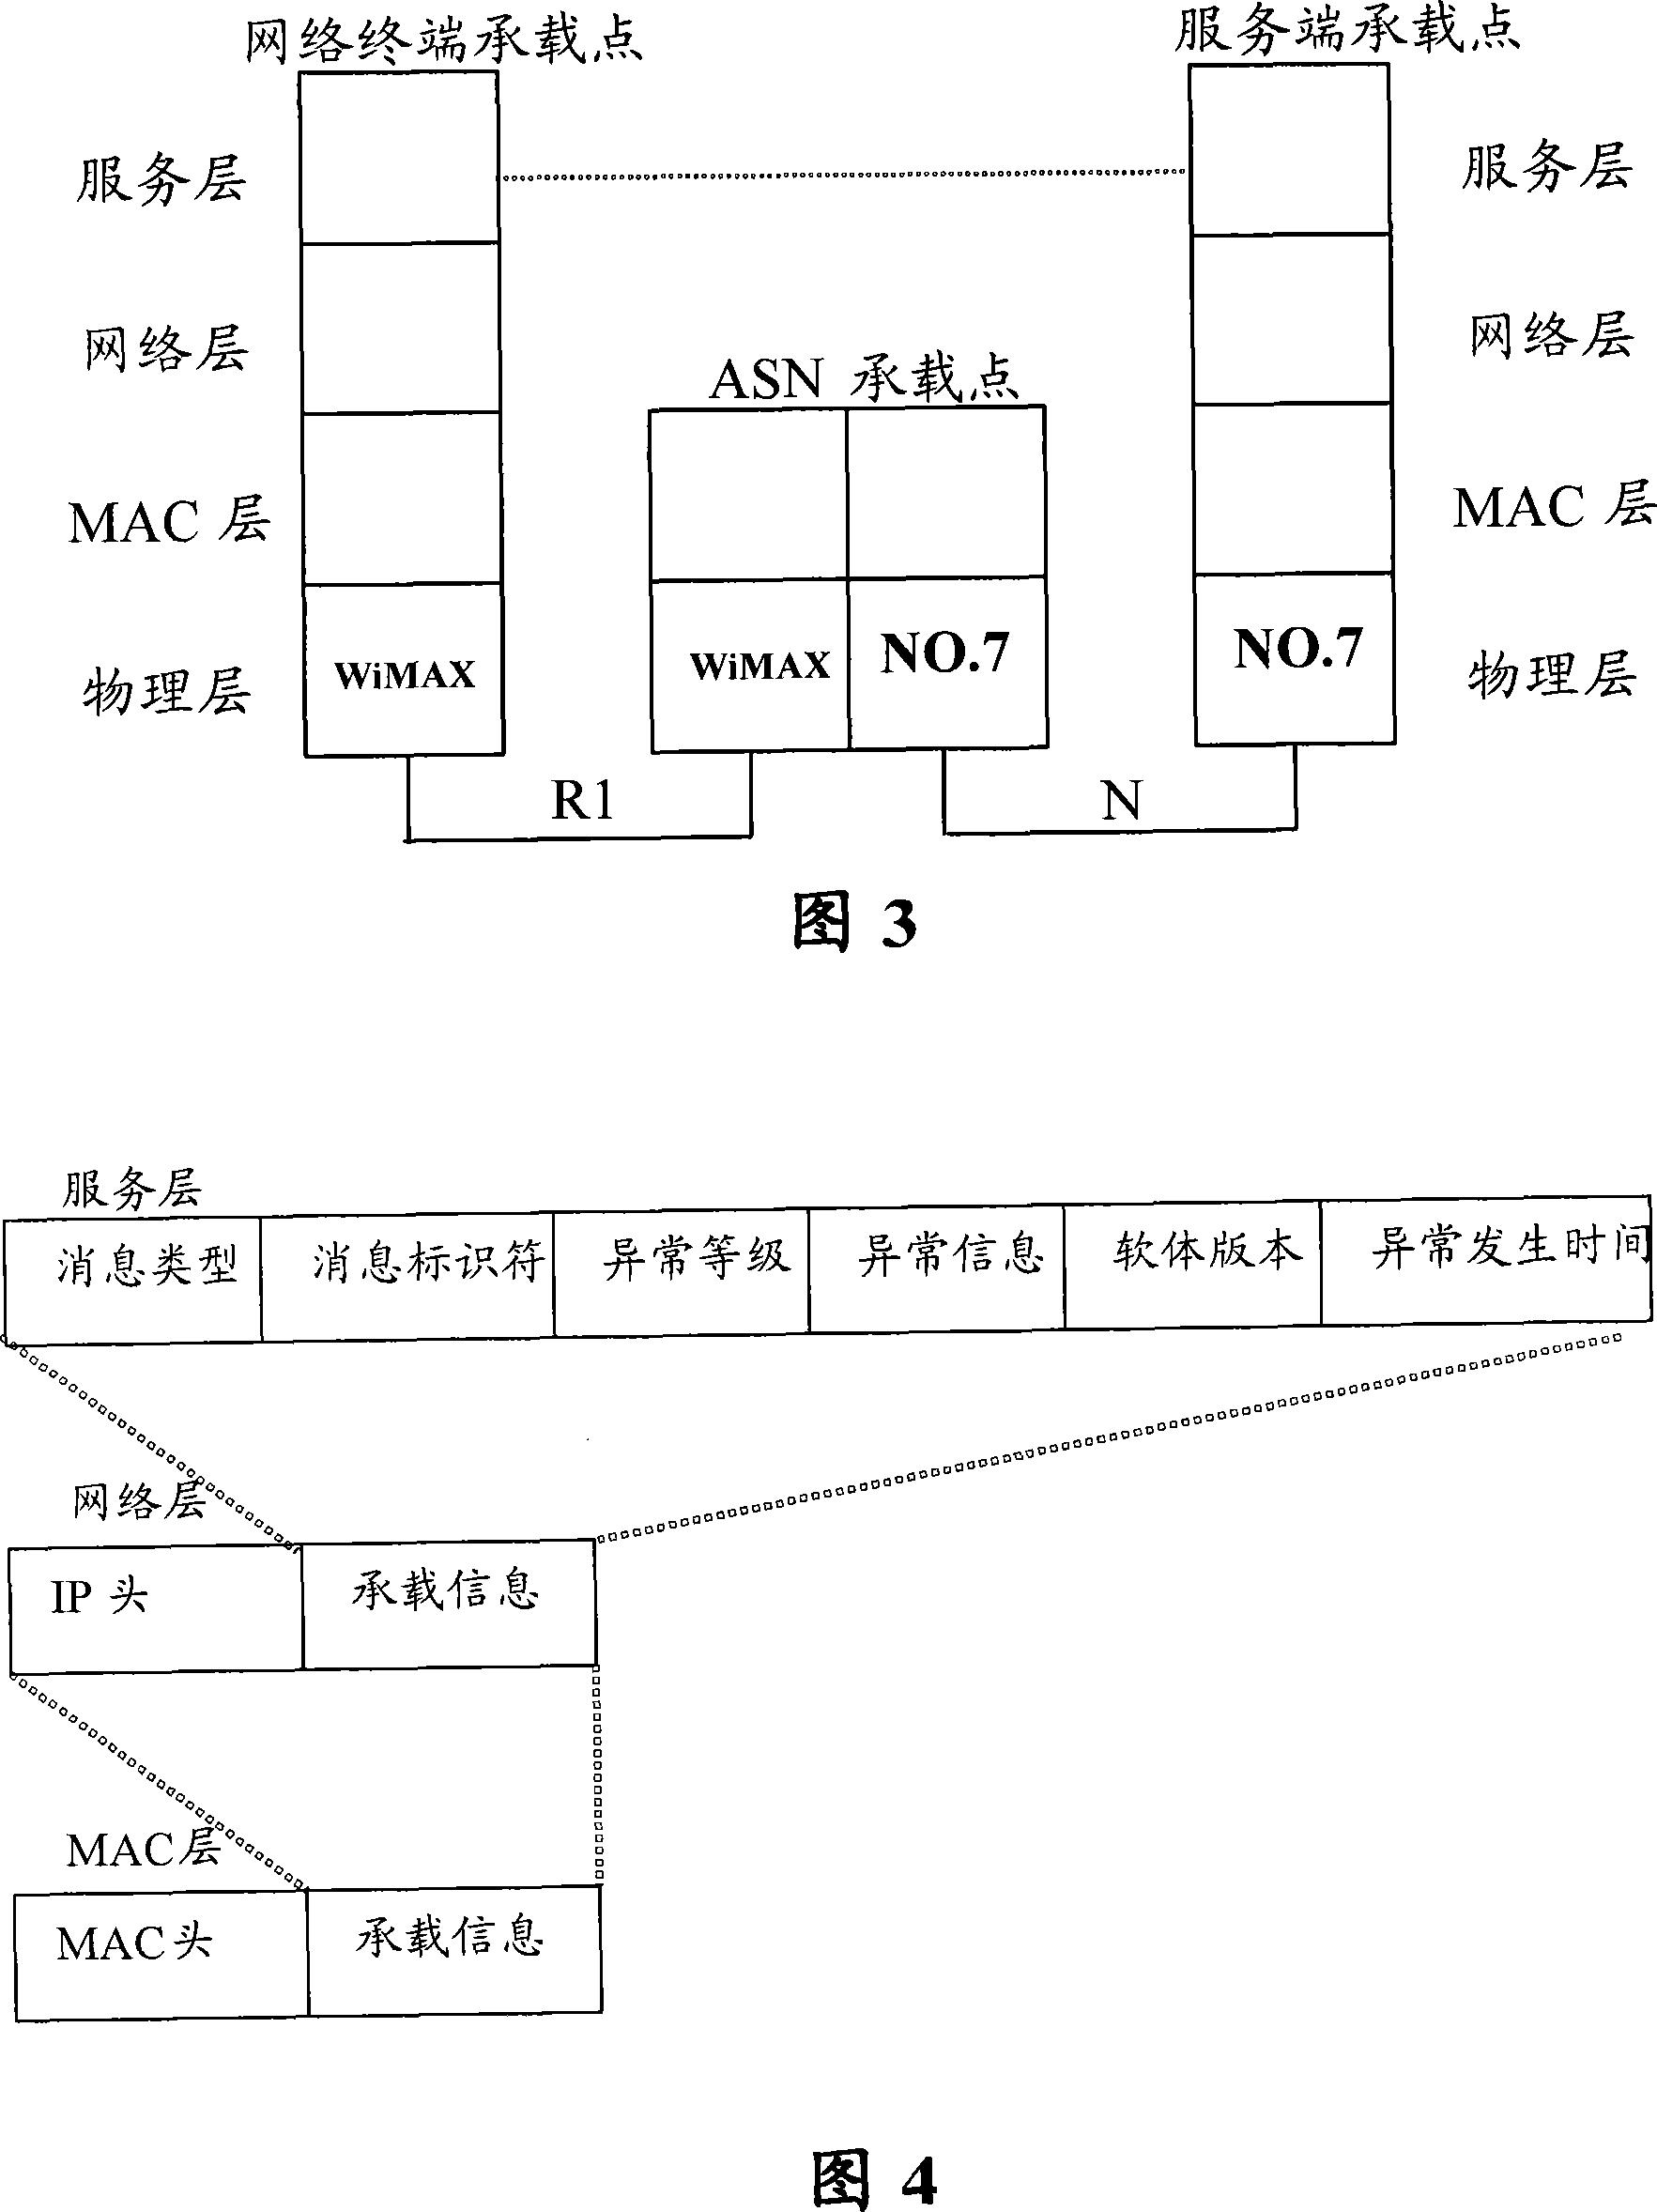 Automatic reporting method and device for exception information